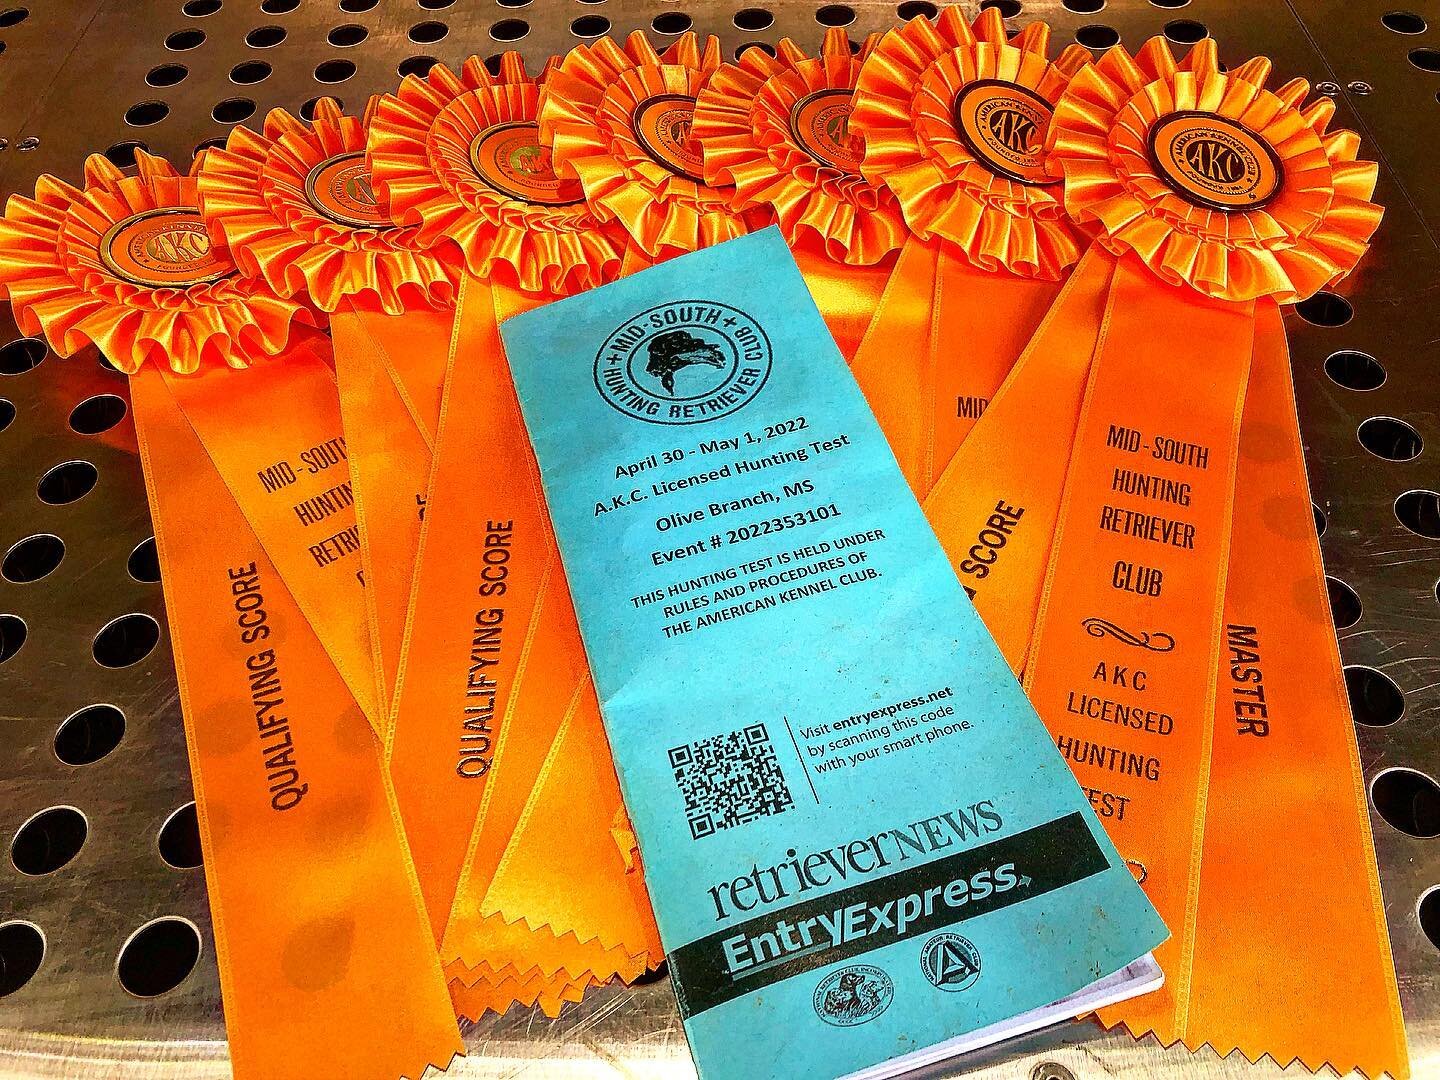 We had a great weekend in Olive Branch Ms passing 7 out of 7 dogs! Thanks to MSHRC for putting on a great event!

#proplansportingdogs 
#deerskindogtrailers